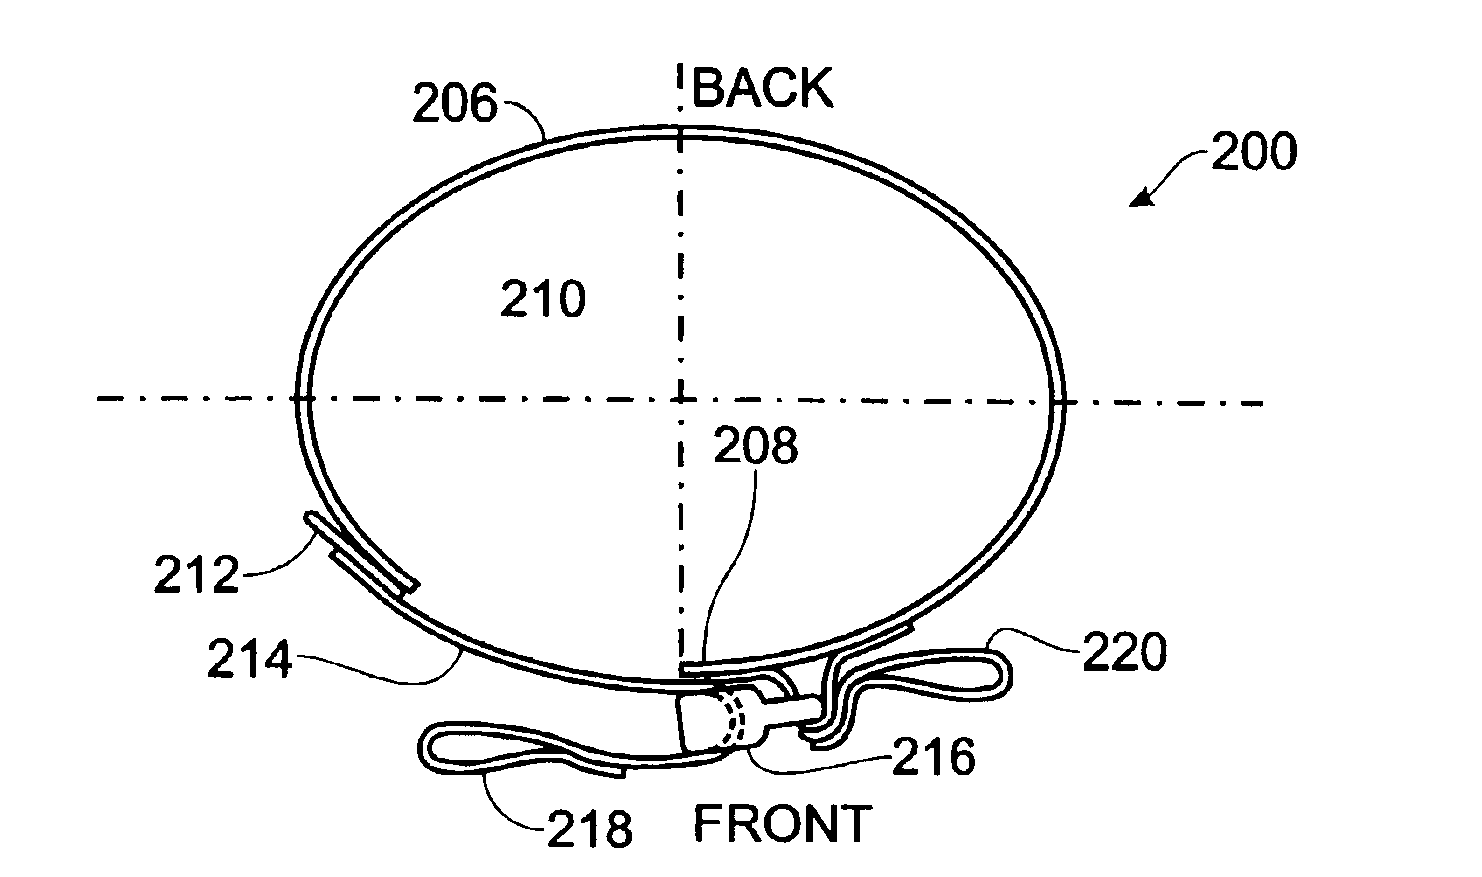 Apparatus and method for stabilizing pelvic ring disruption